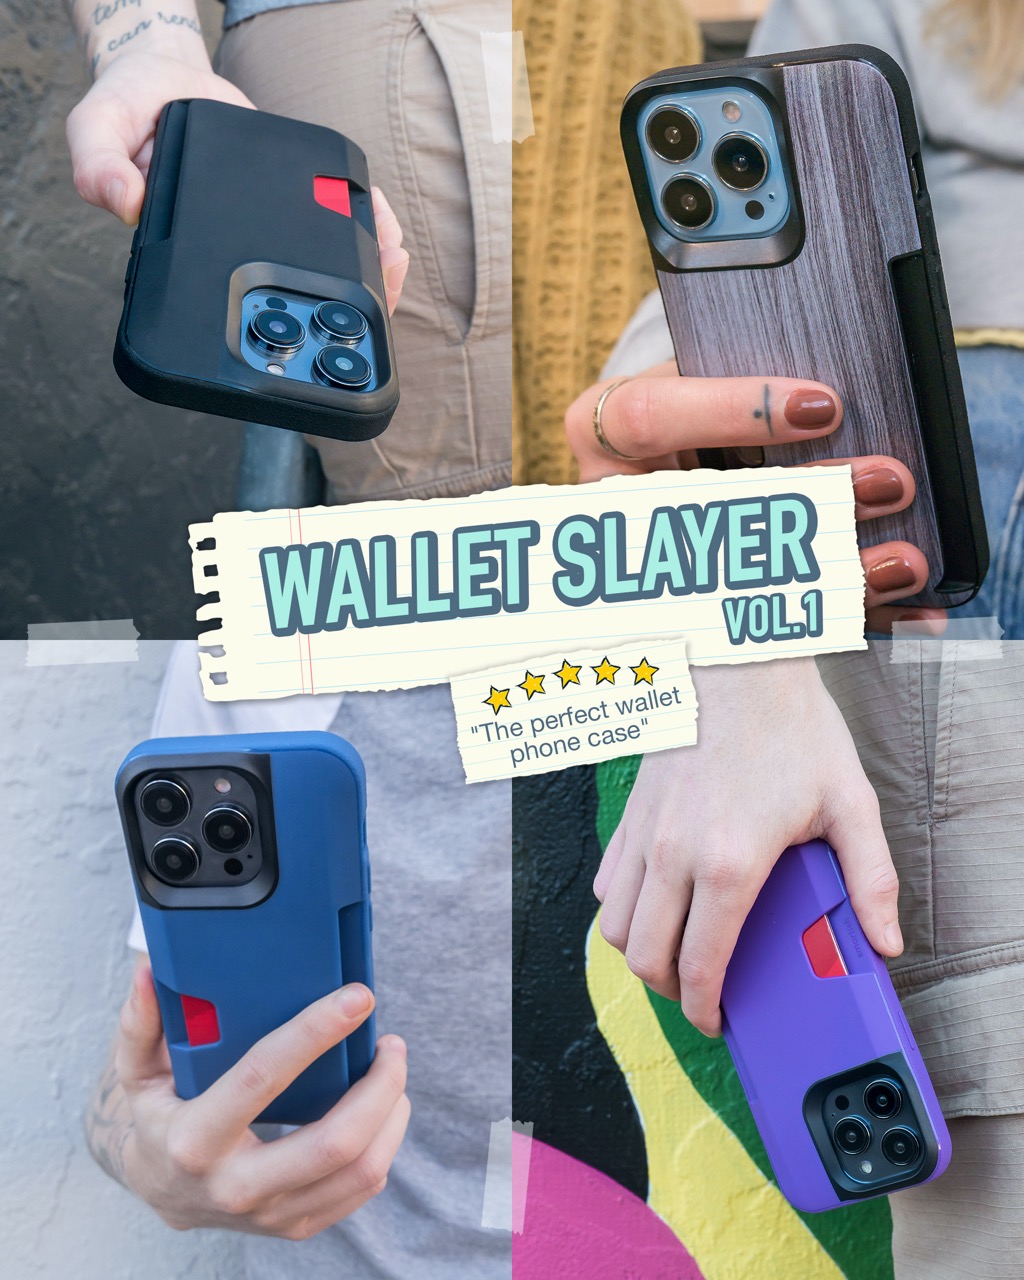 Smartish Wallet Slayer Vol. 1 - Card Case for iPhone 11 Pro, iPhone 11 Pro / Black Tie Affair